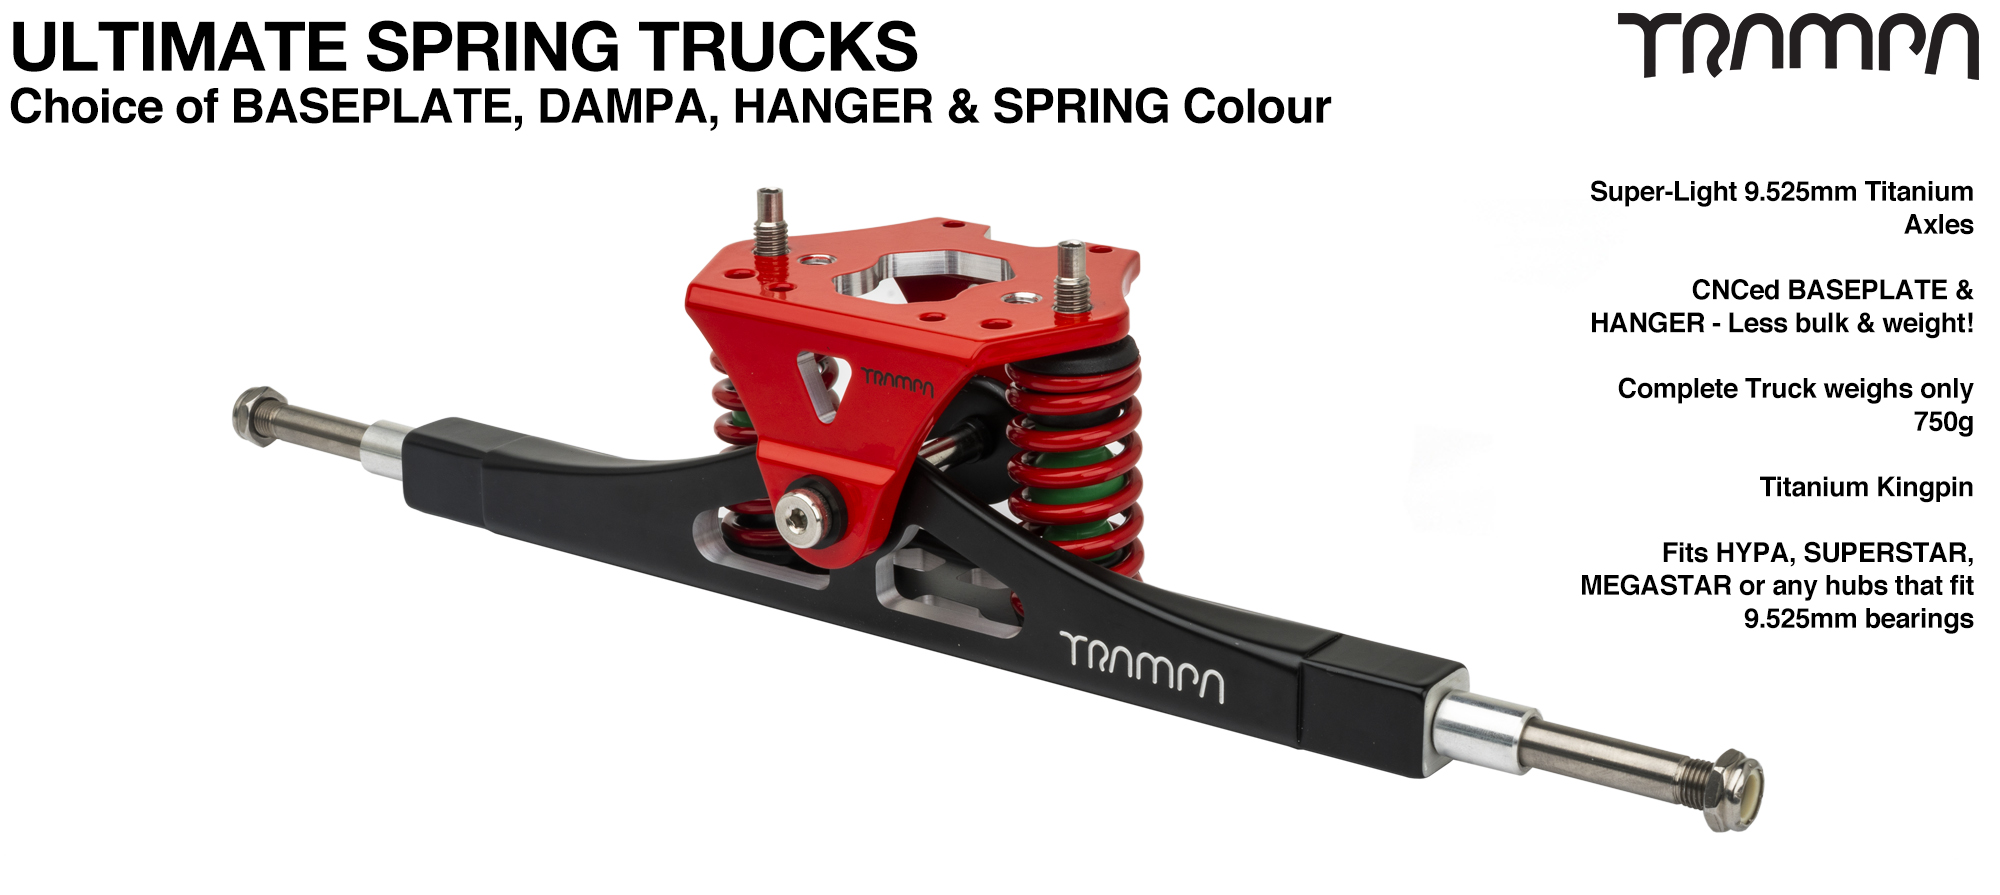 Precision CNC ULTIMATE ATB TRUCK with CNC Motor Mount fixing points, RED Baseplate, TITANIUM Axles & Kingpin